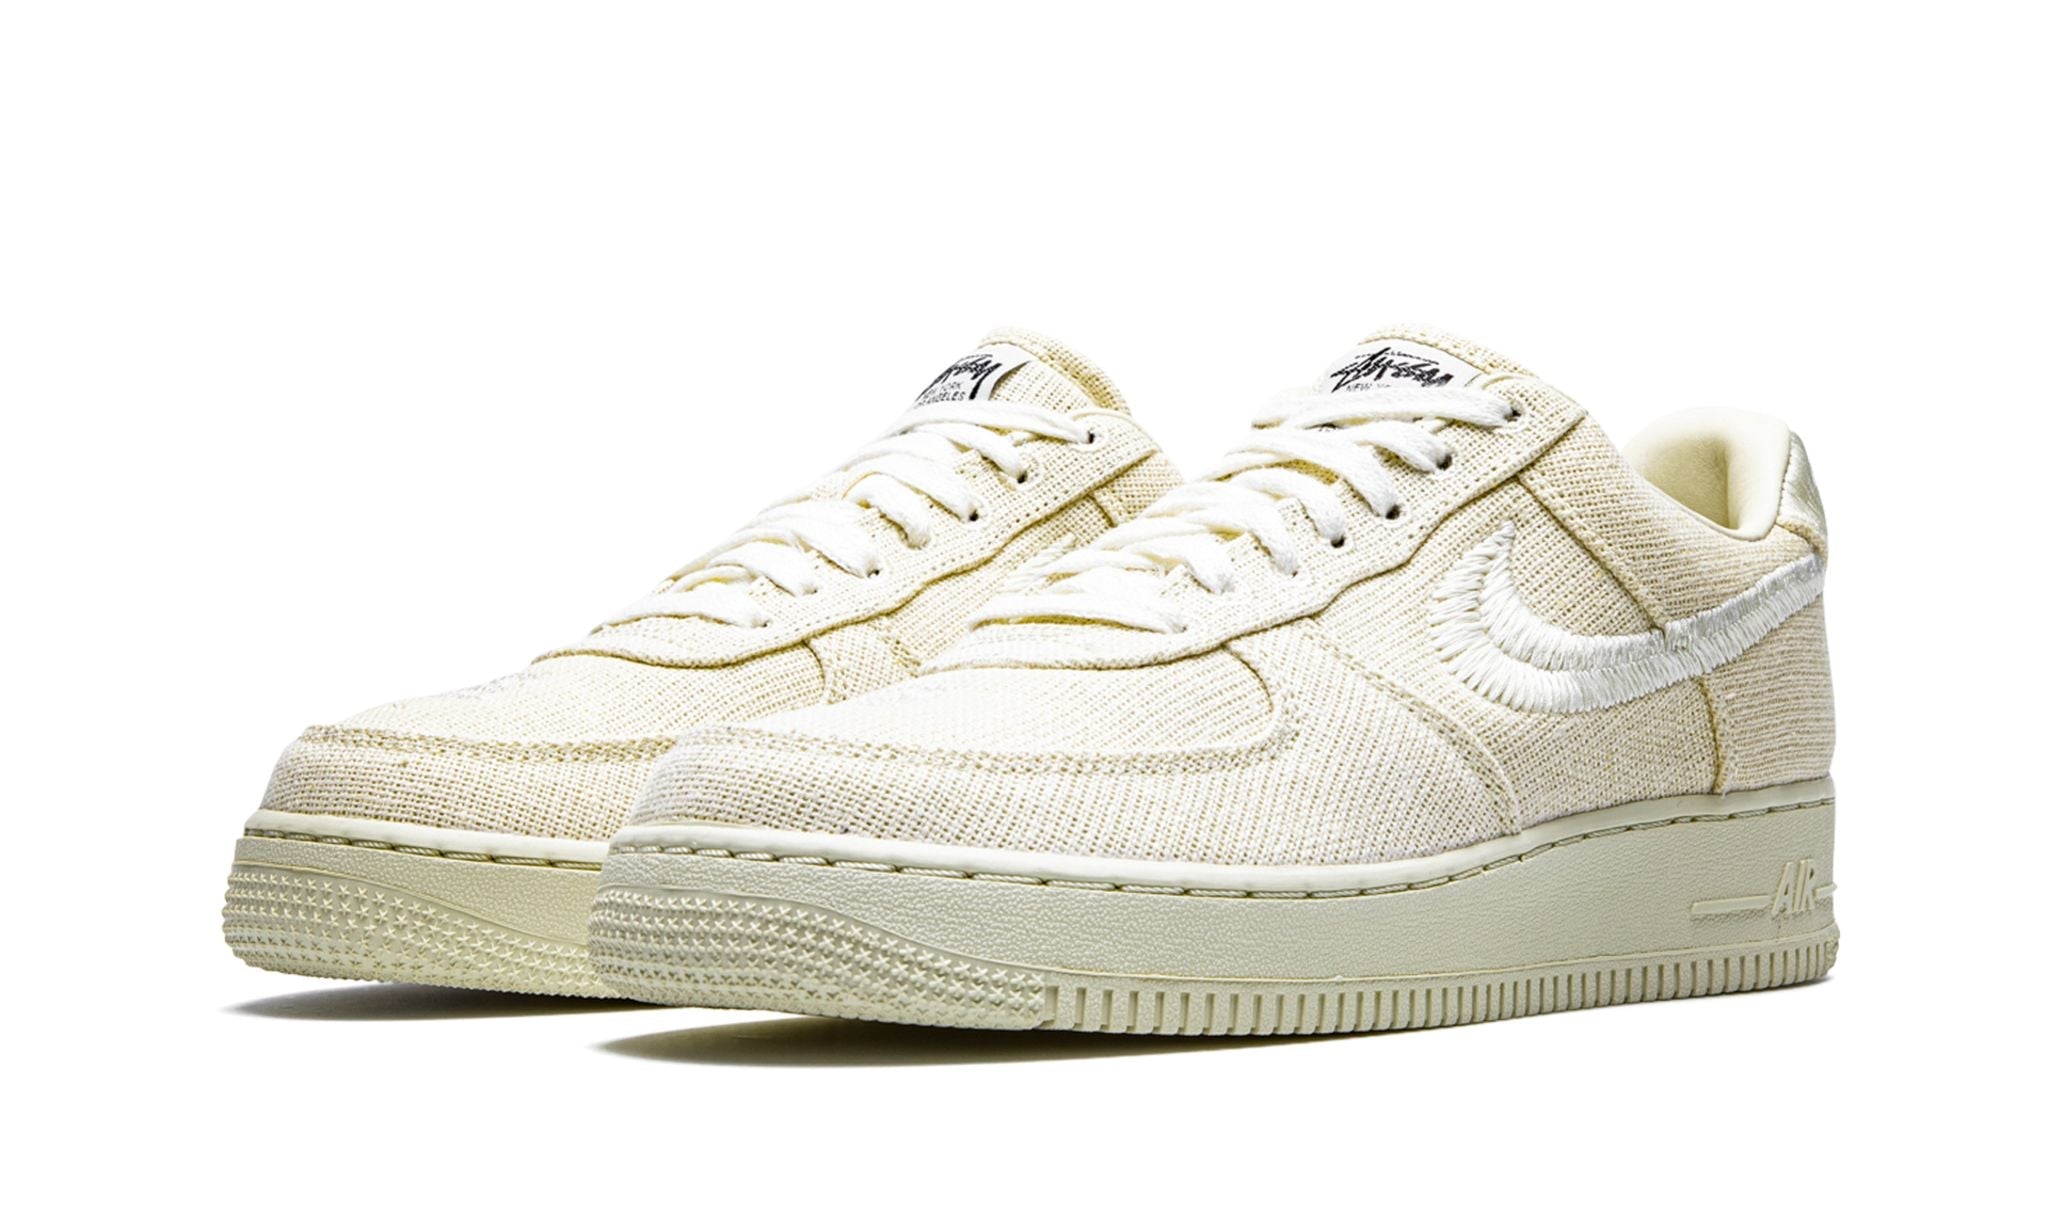 Nike Air Force 1 Low Stussy Fossil - Air Force 1 - Pirri